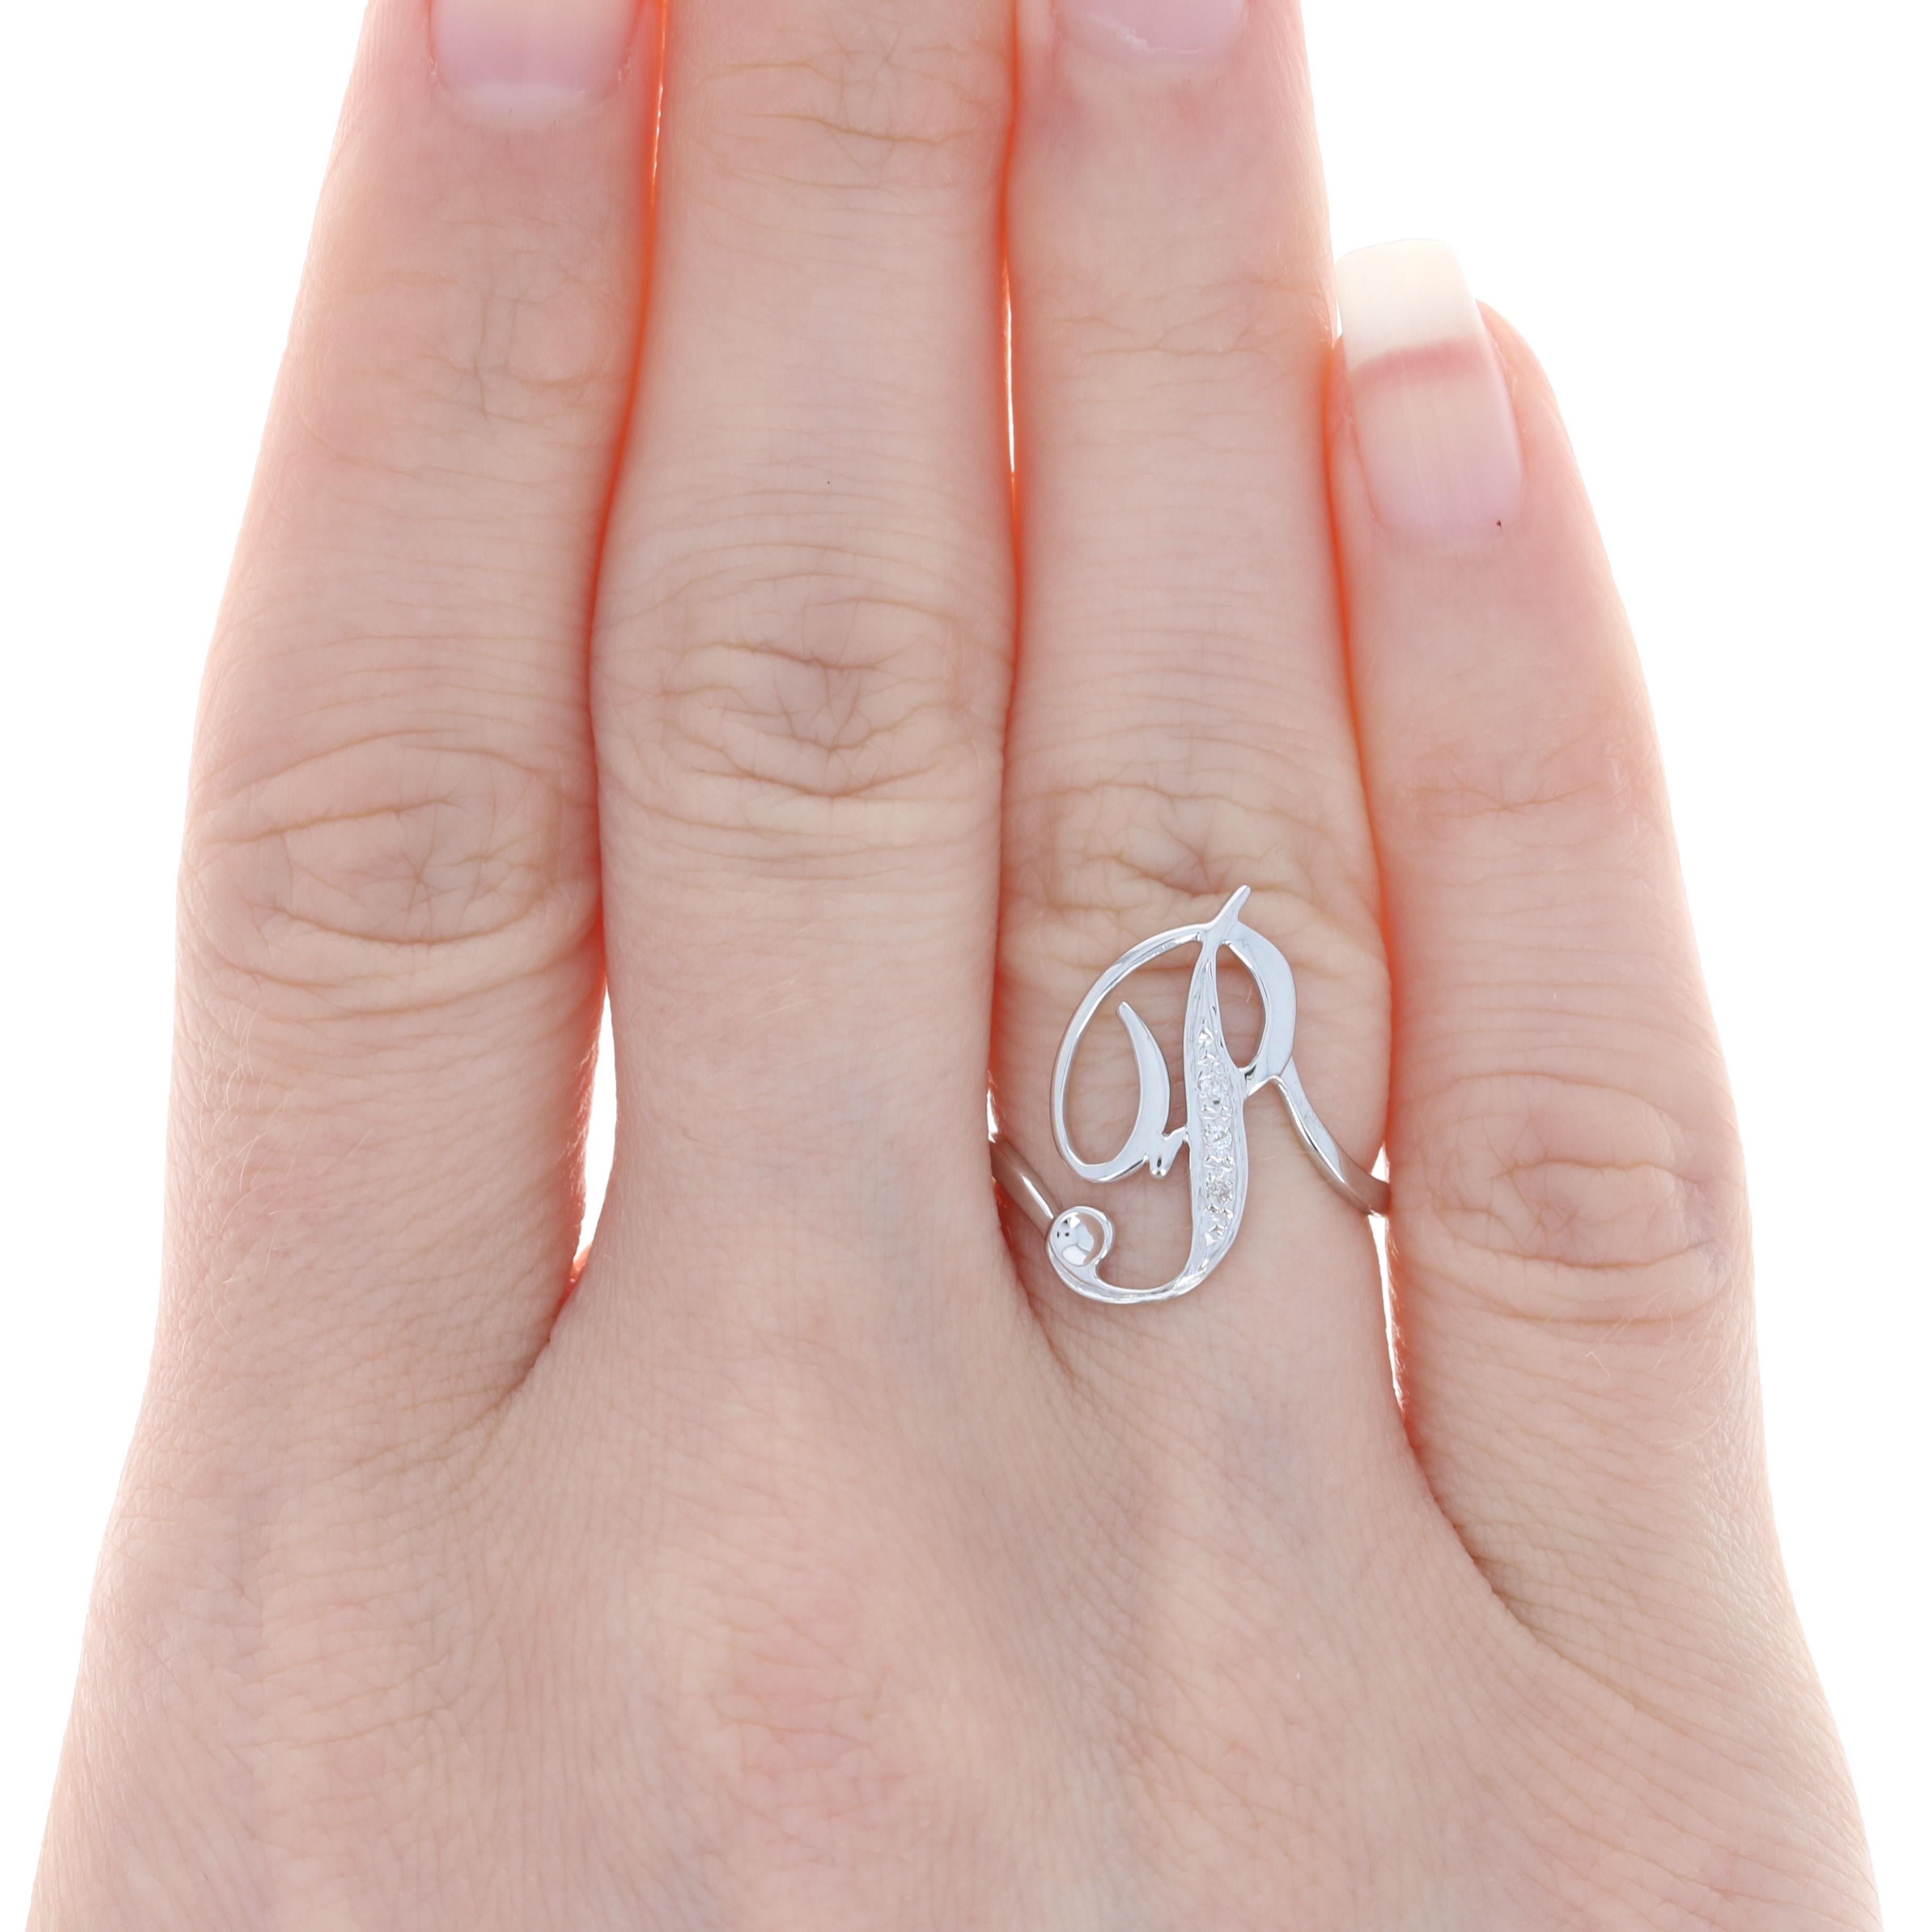 New Initial P Signet Ring, 18k White Gold Personalized Monogram Letter 3